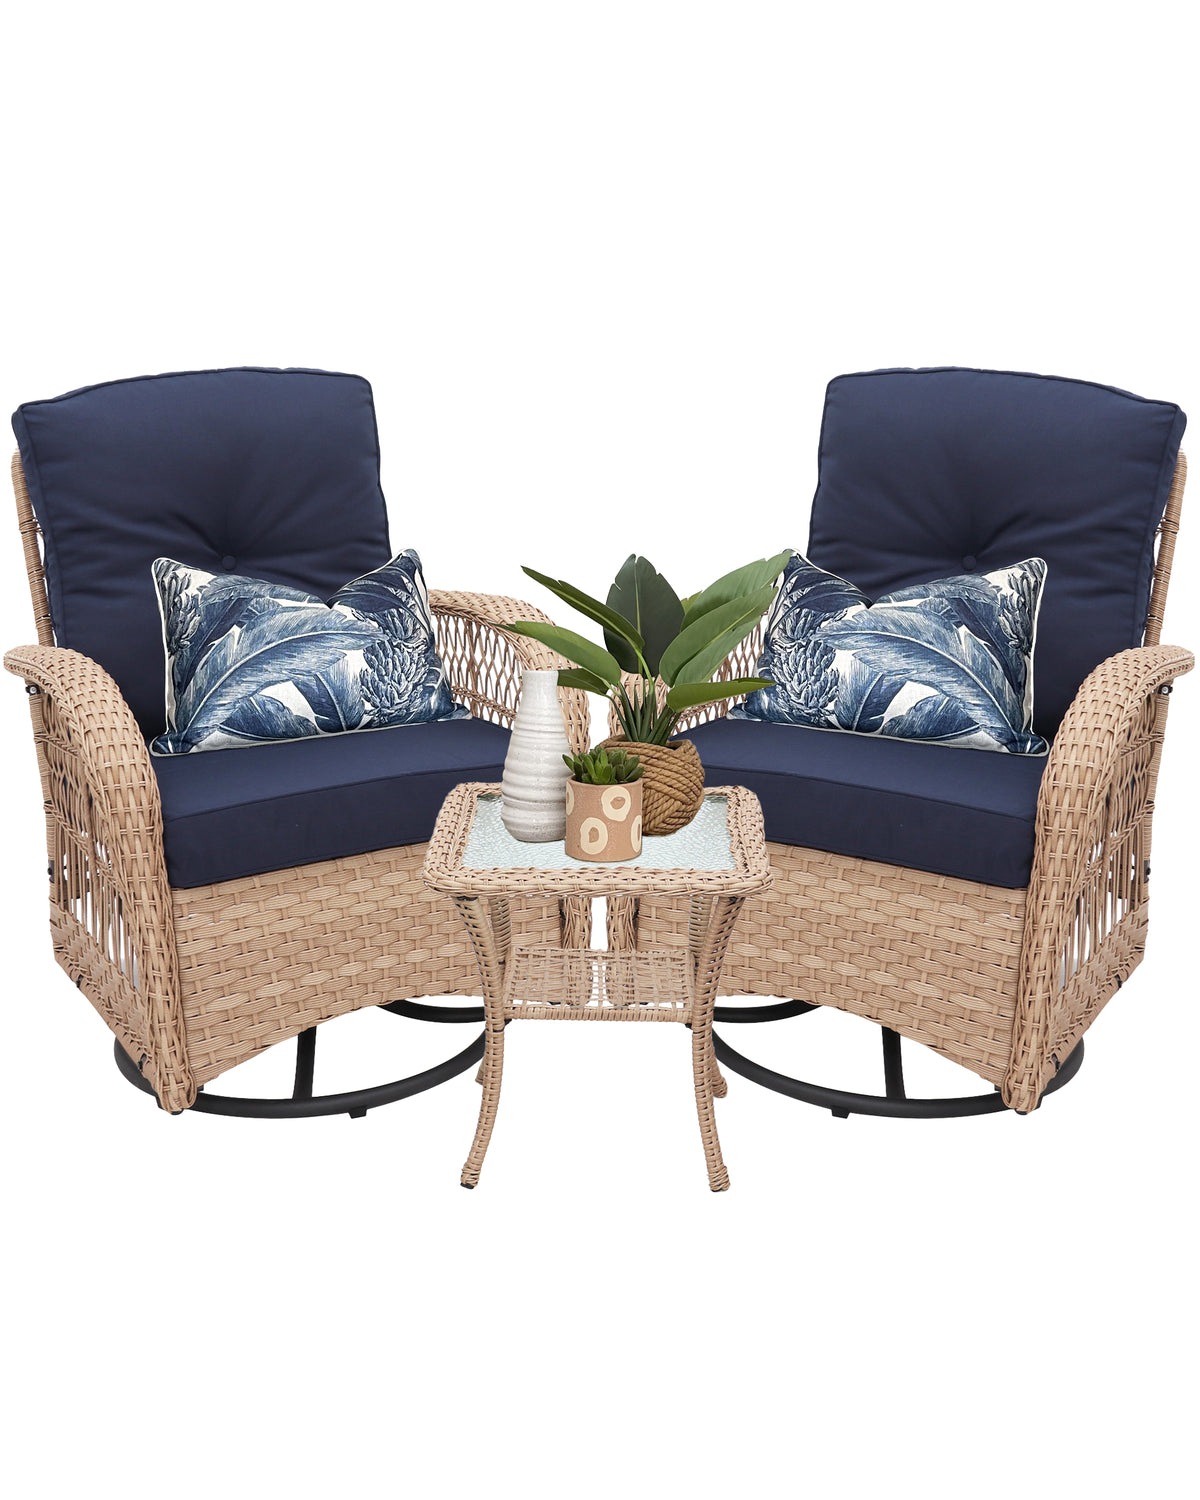 Swivel Rocker Patio Chairs Set of 2 with Matching Table- Navy Cushion with Natural Wicker